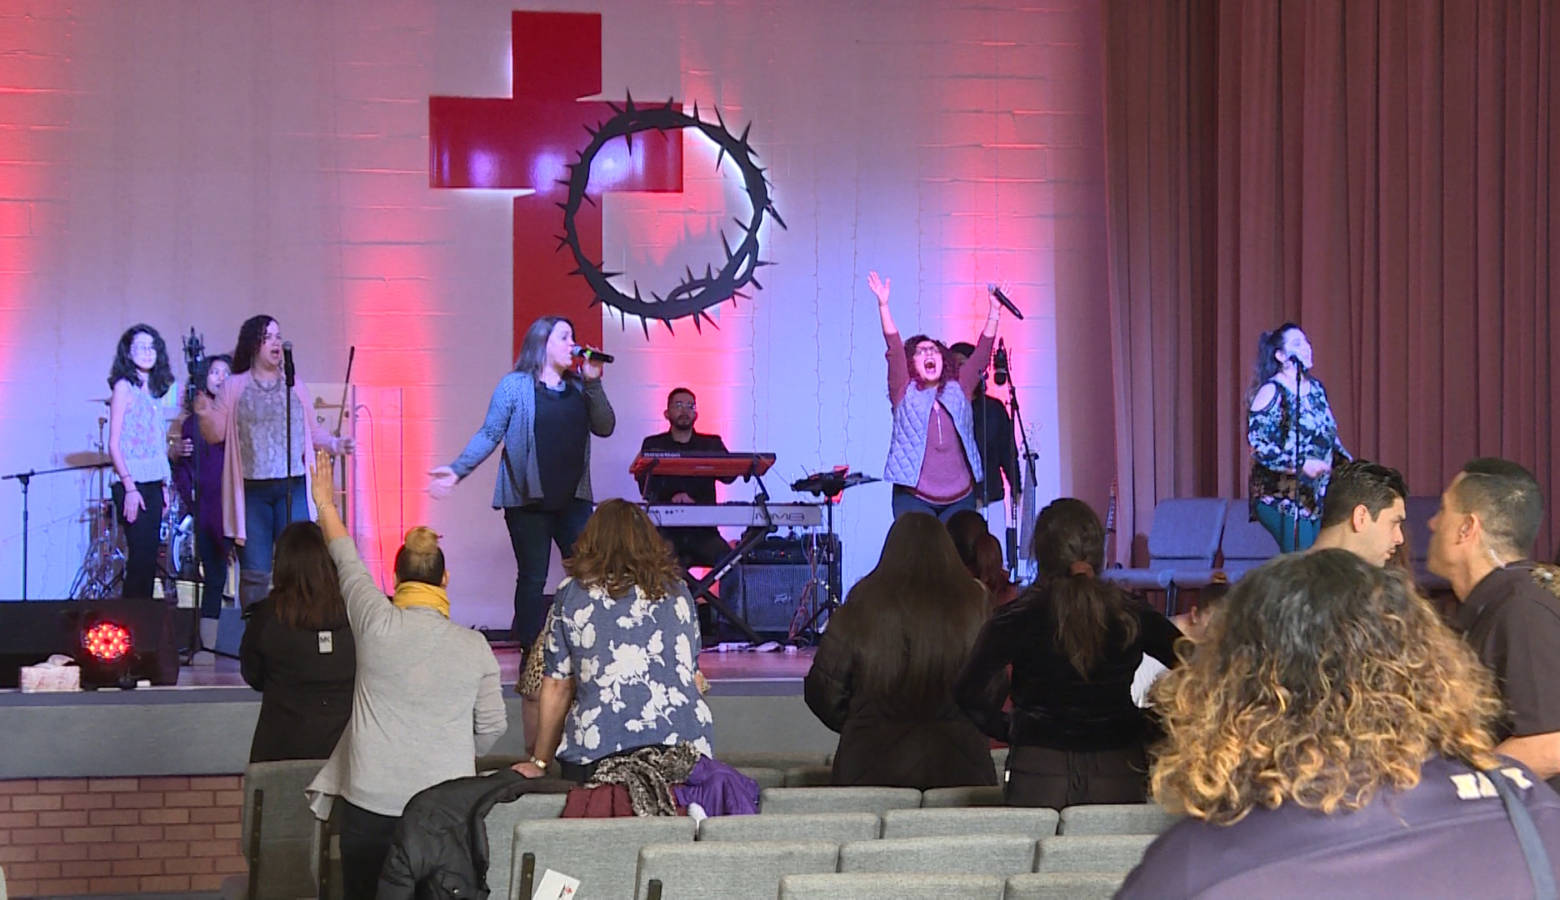 Members of The Cross Church — nondenominational, multicultural church in East Chicago — sing praise songs at one of their Sunday services. (Tyler Lake/WTIU)